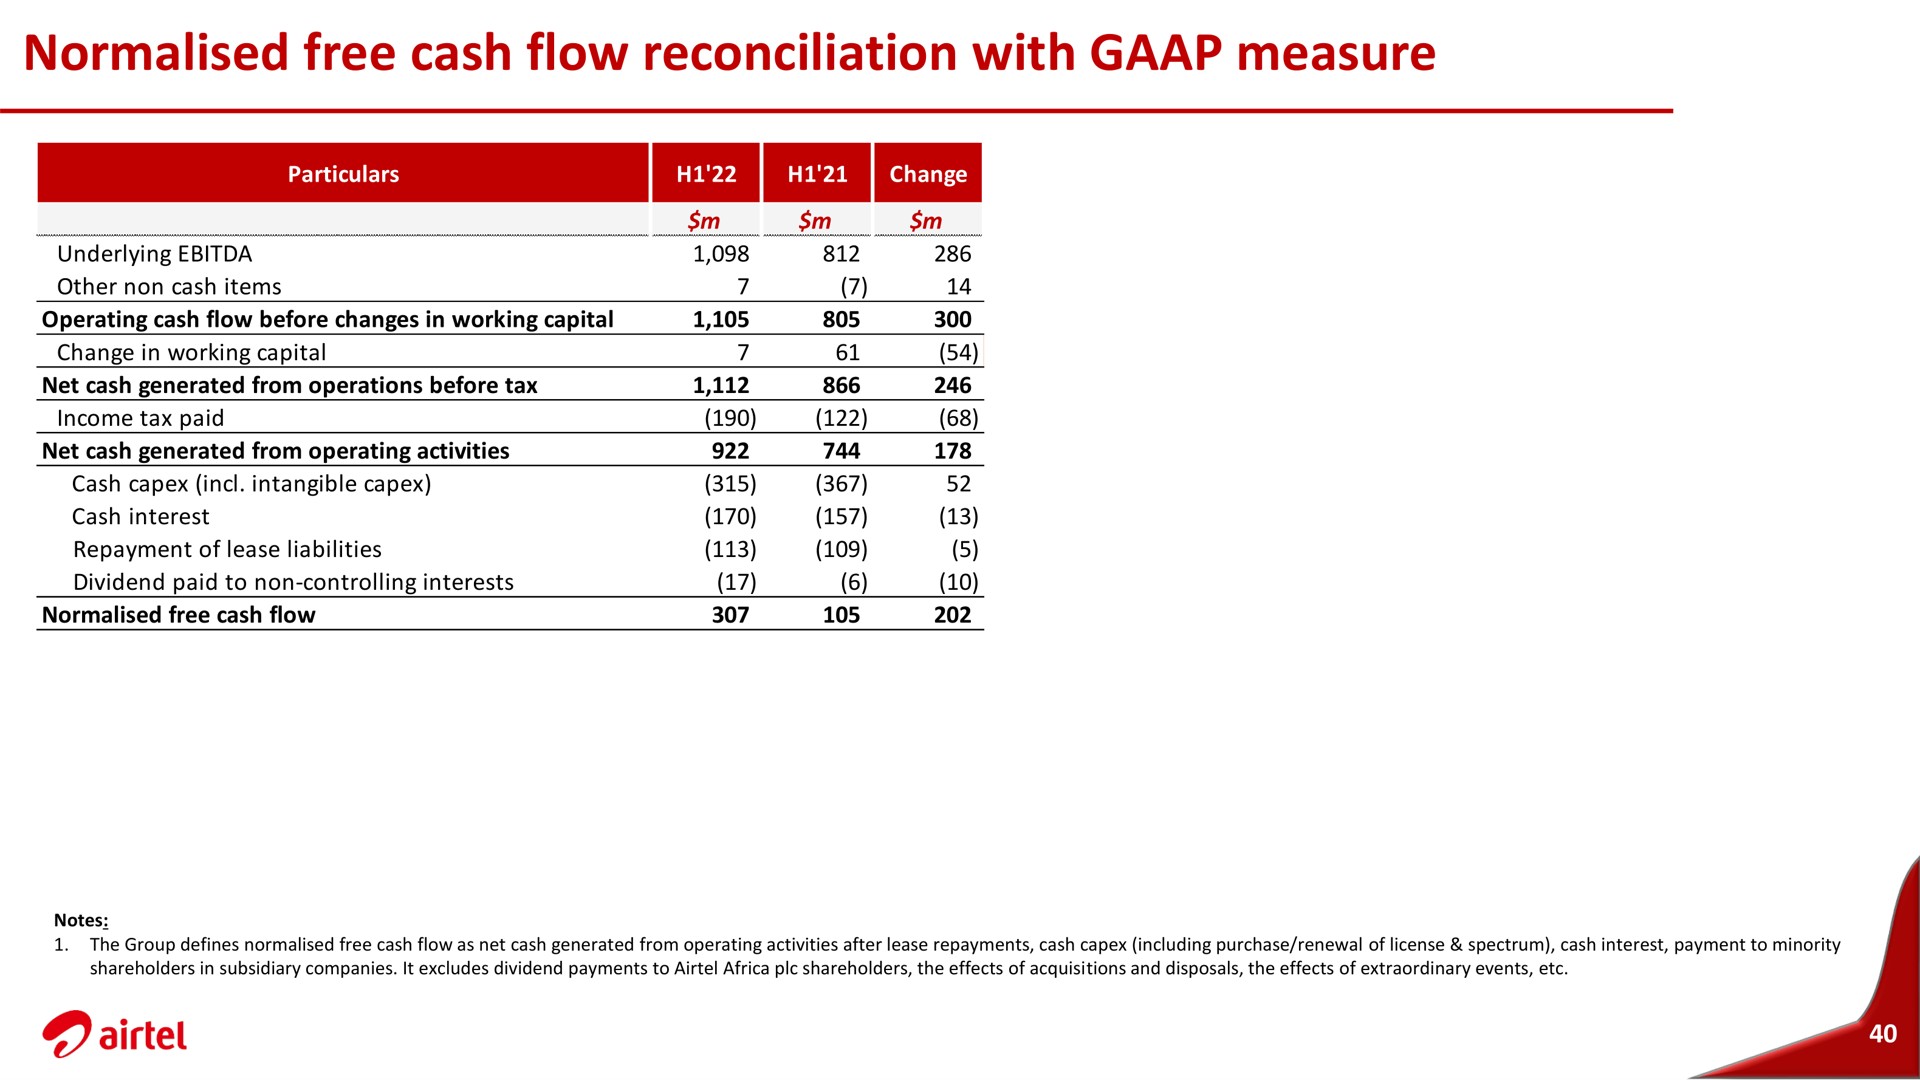 free cash flow reconciliation with measure | Airtel Africa